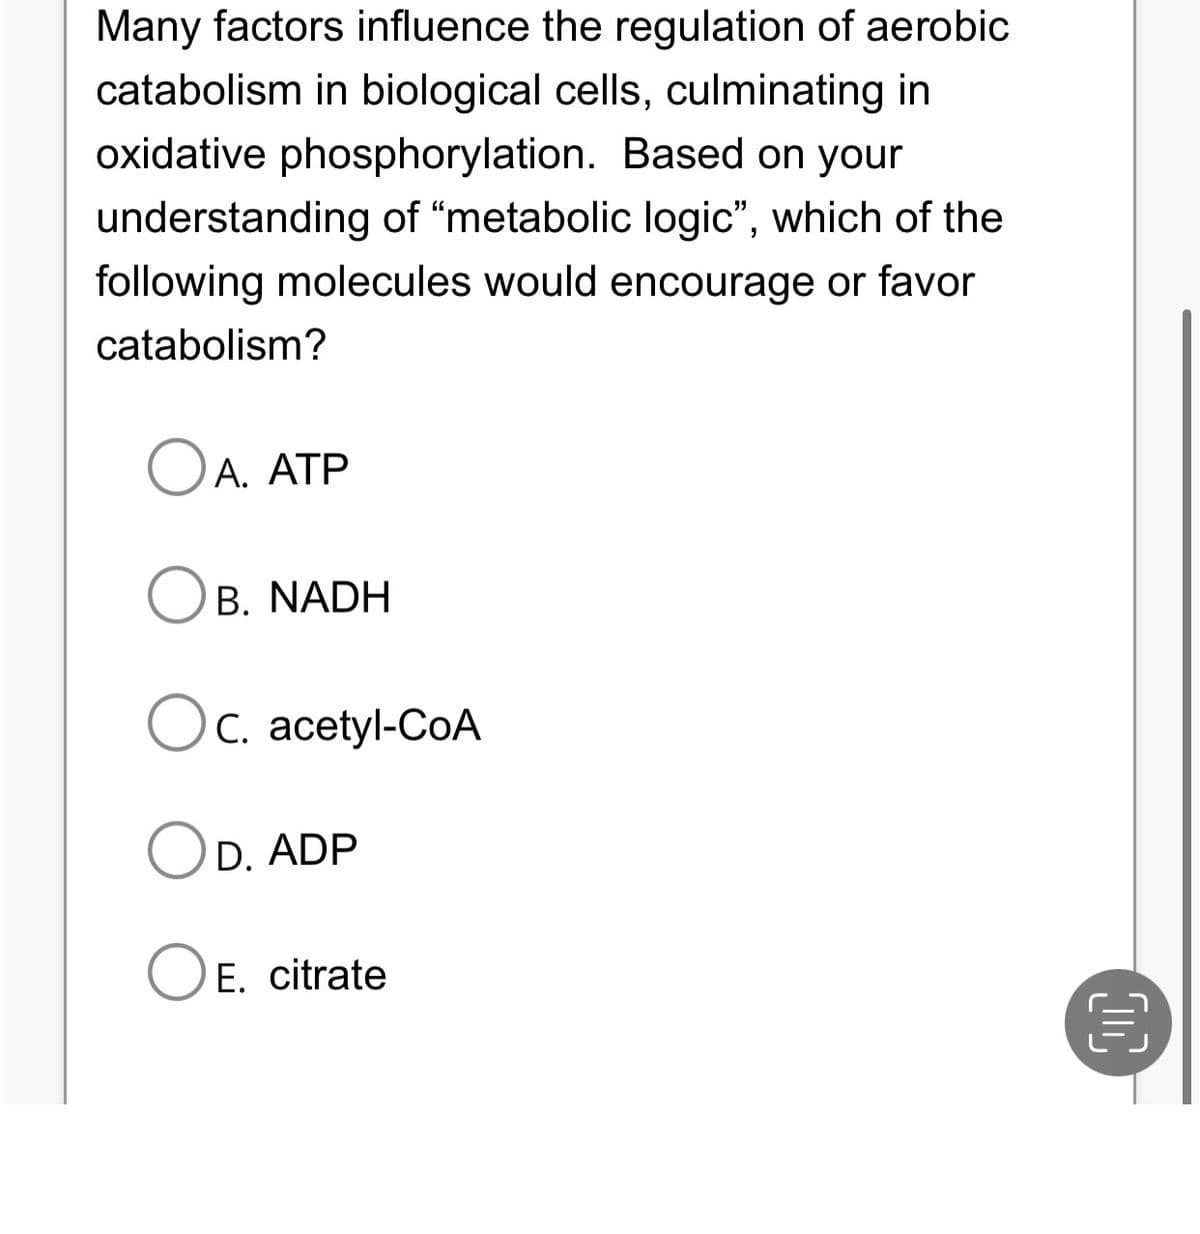 Many factors influence the regulation of aerobic
catabolism in biological cells, culminating in
oxidative phosphorylation. Based on your
understanding of "metabolic logic", which of the
following molecules would encourage or favor
catabolism?
OA. ATP
OB. NADH
Oc. acetyl-CoA
OD. ADP
O E. citrate
